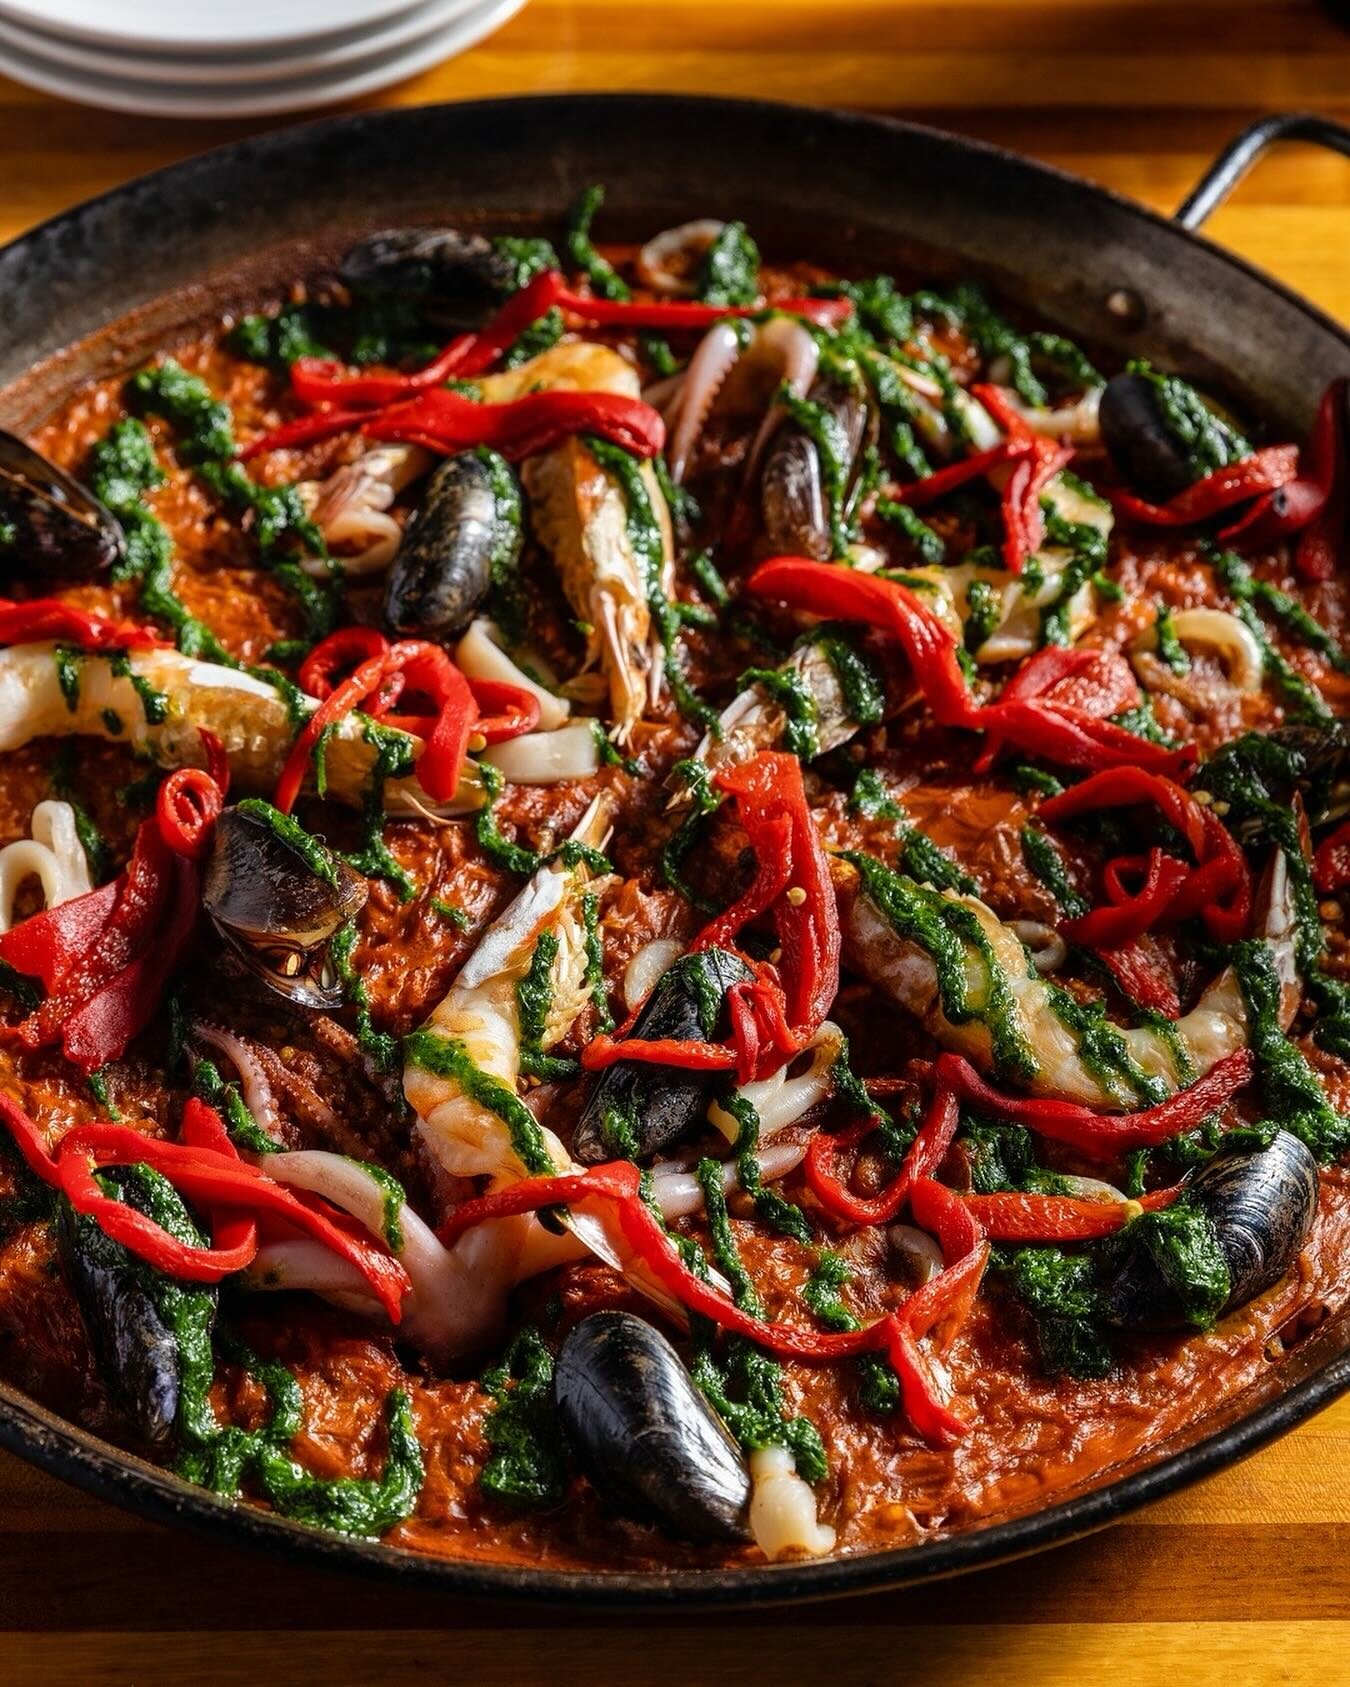 🎉 Nothing says &ldquo;It&rsquo;s the Weekend!&rdquo; quite like Paella! 🥘 

PAELLA MARISCOS
salmoretta . lobster stock . mussels . calamari . rock shrimp . tiger prawns . piquillo peppers . salsa verde

Walk-ins always welcome, reservations, menu, 